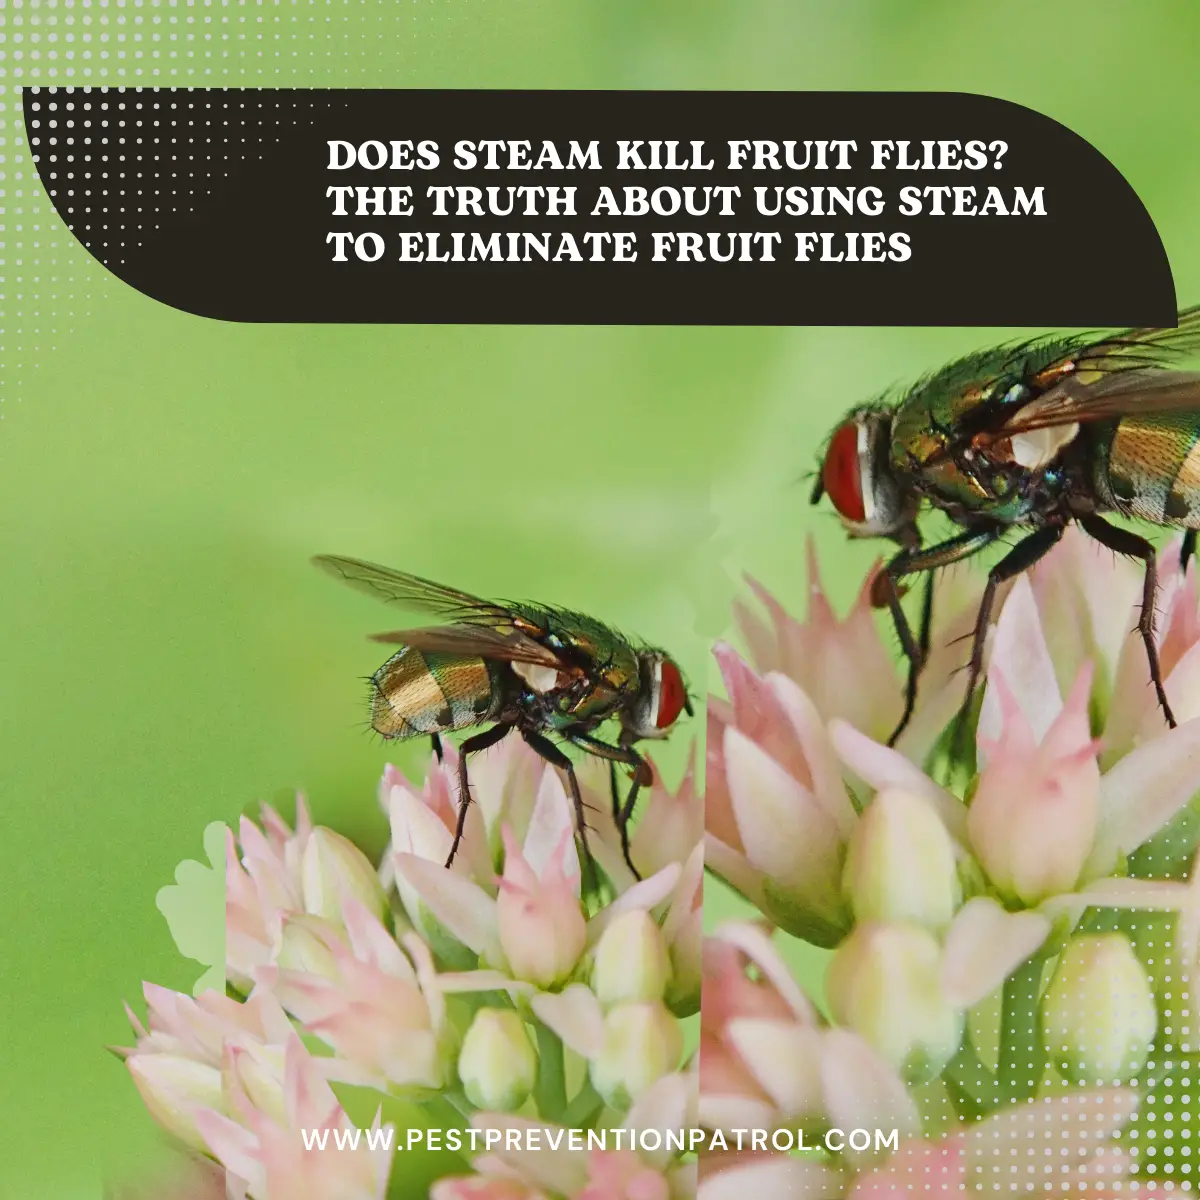 Does Steam Kill Fruit Flies_ The Truth About Using Steam to Eliminate Fruit Flies